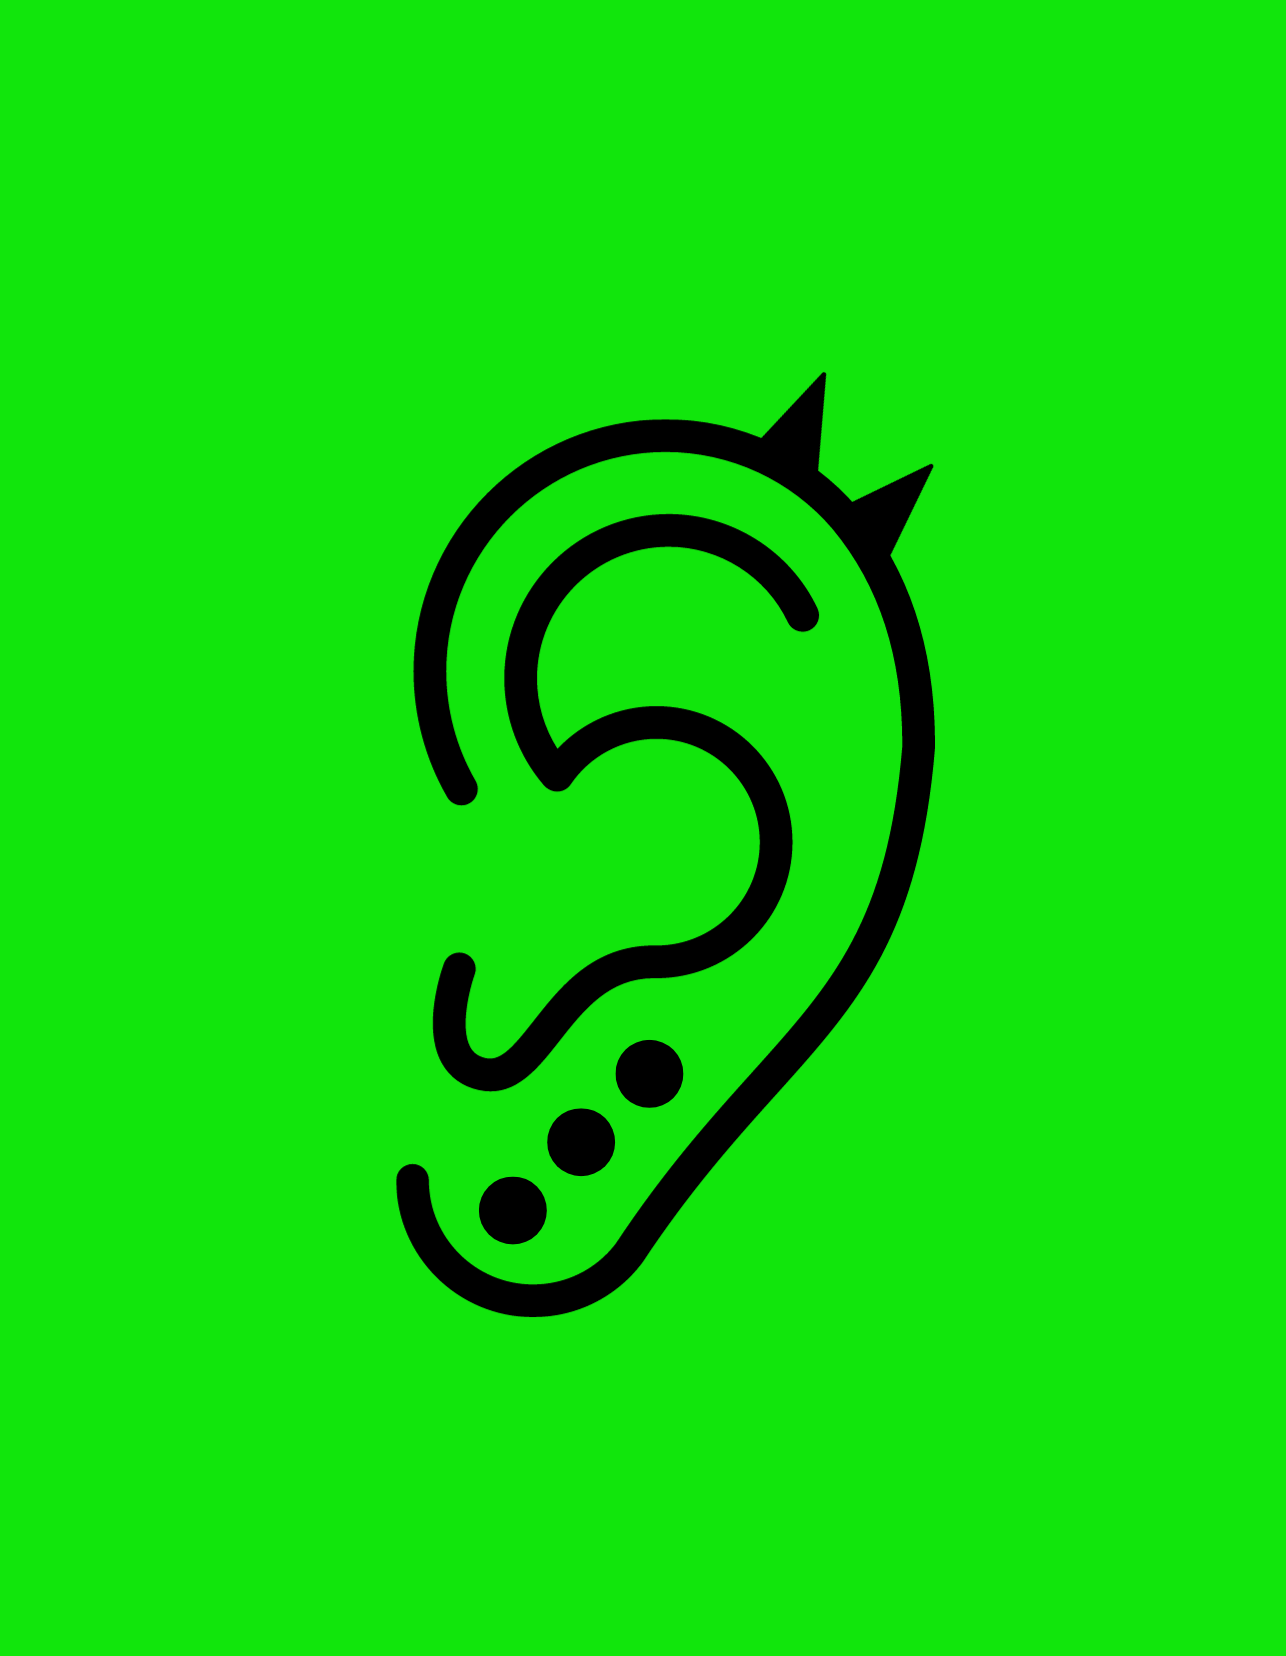 ear design with ear piercings on a green background